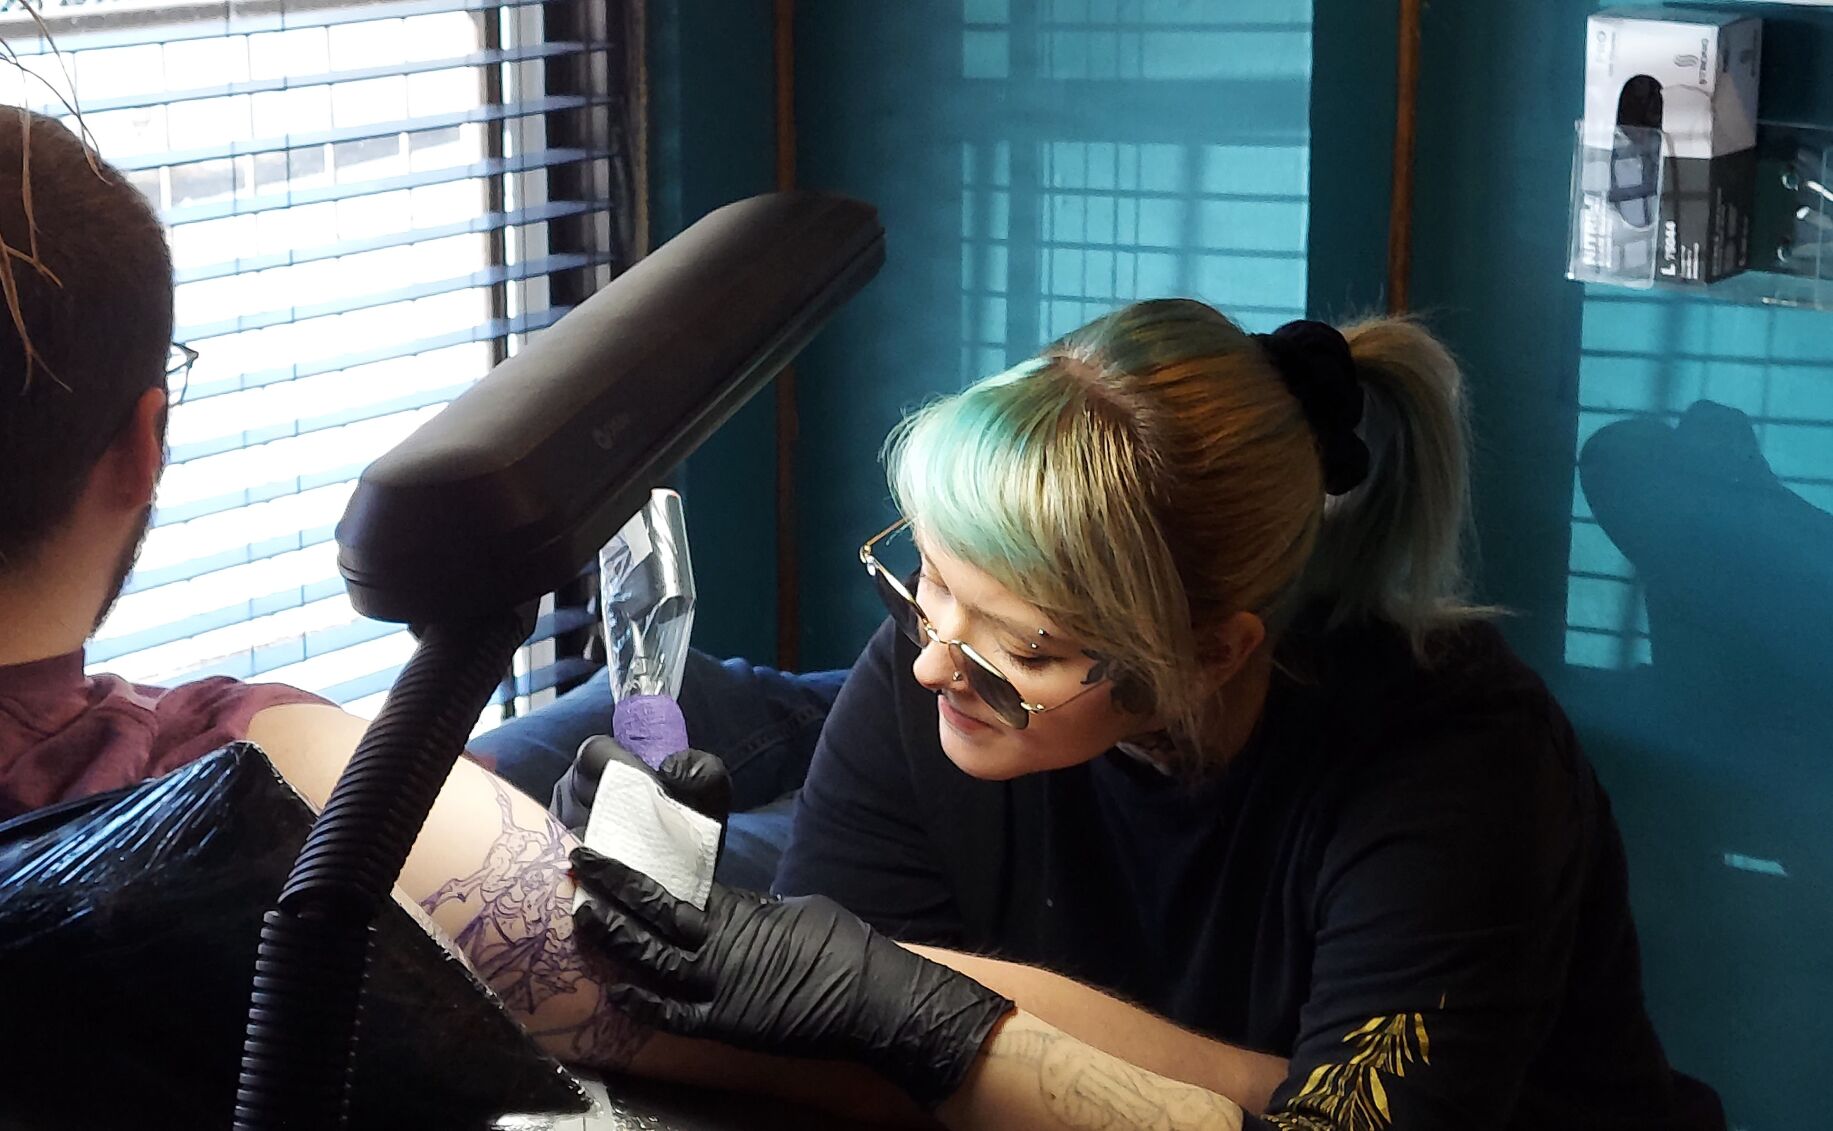 New Columbia tattoo parlors have harder time finding spots to open under  city rules  Columbia Business  postandcouriercom